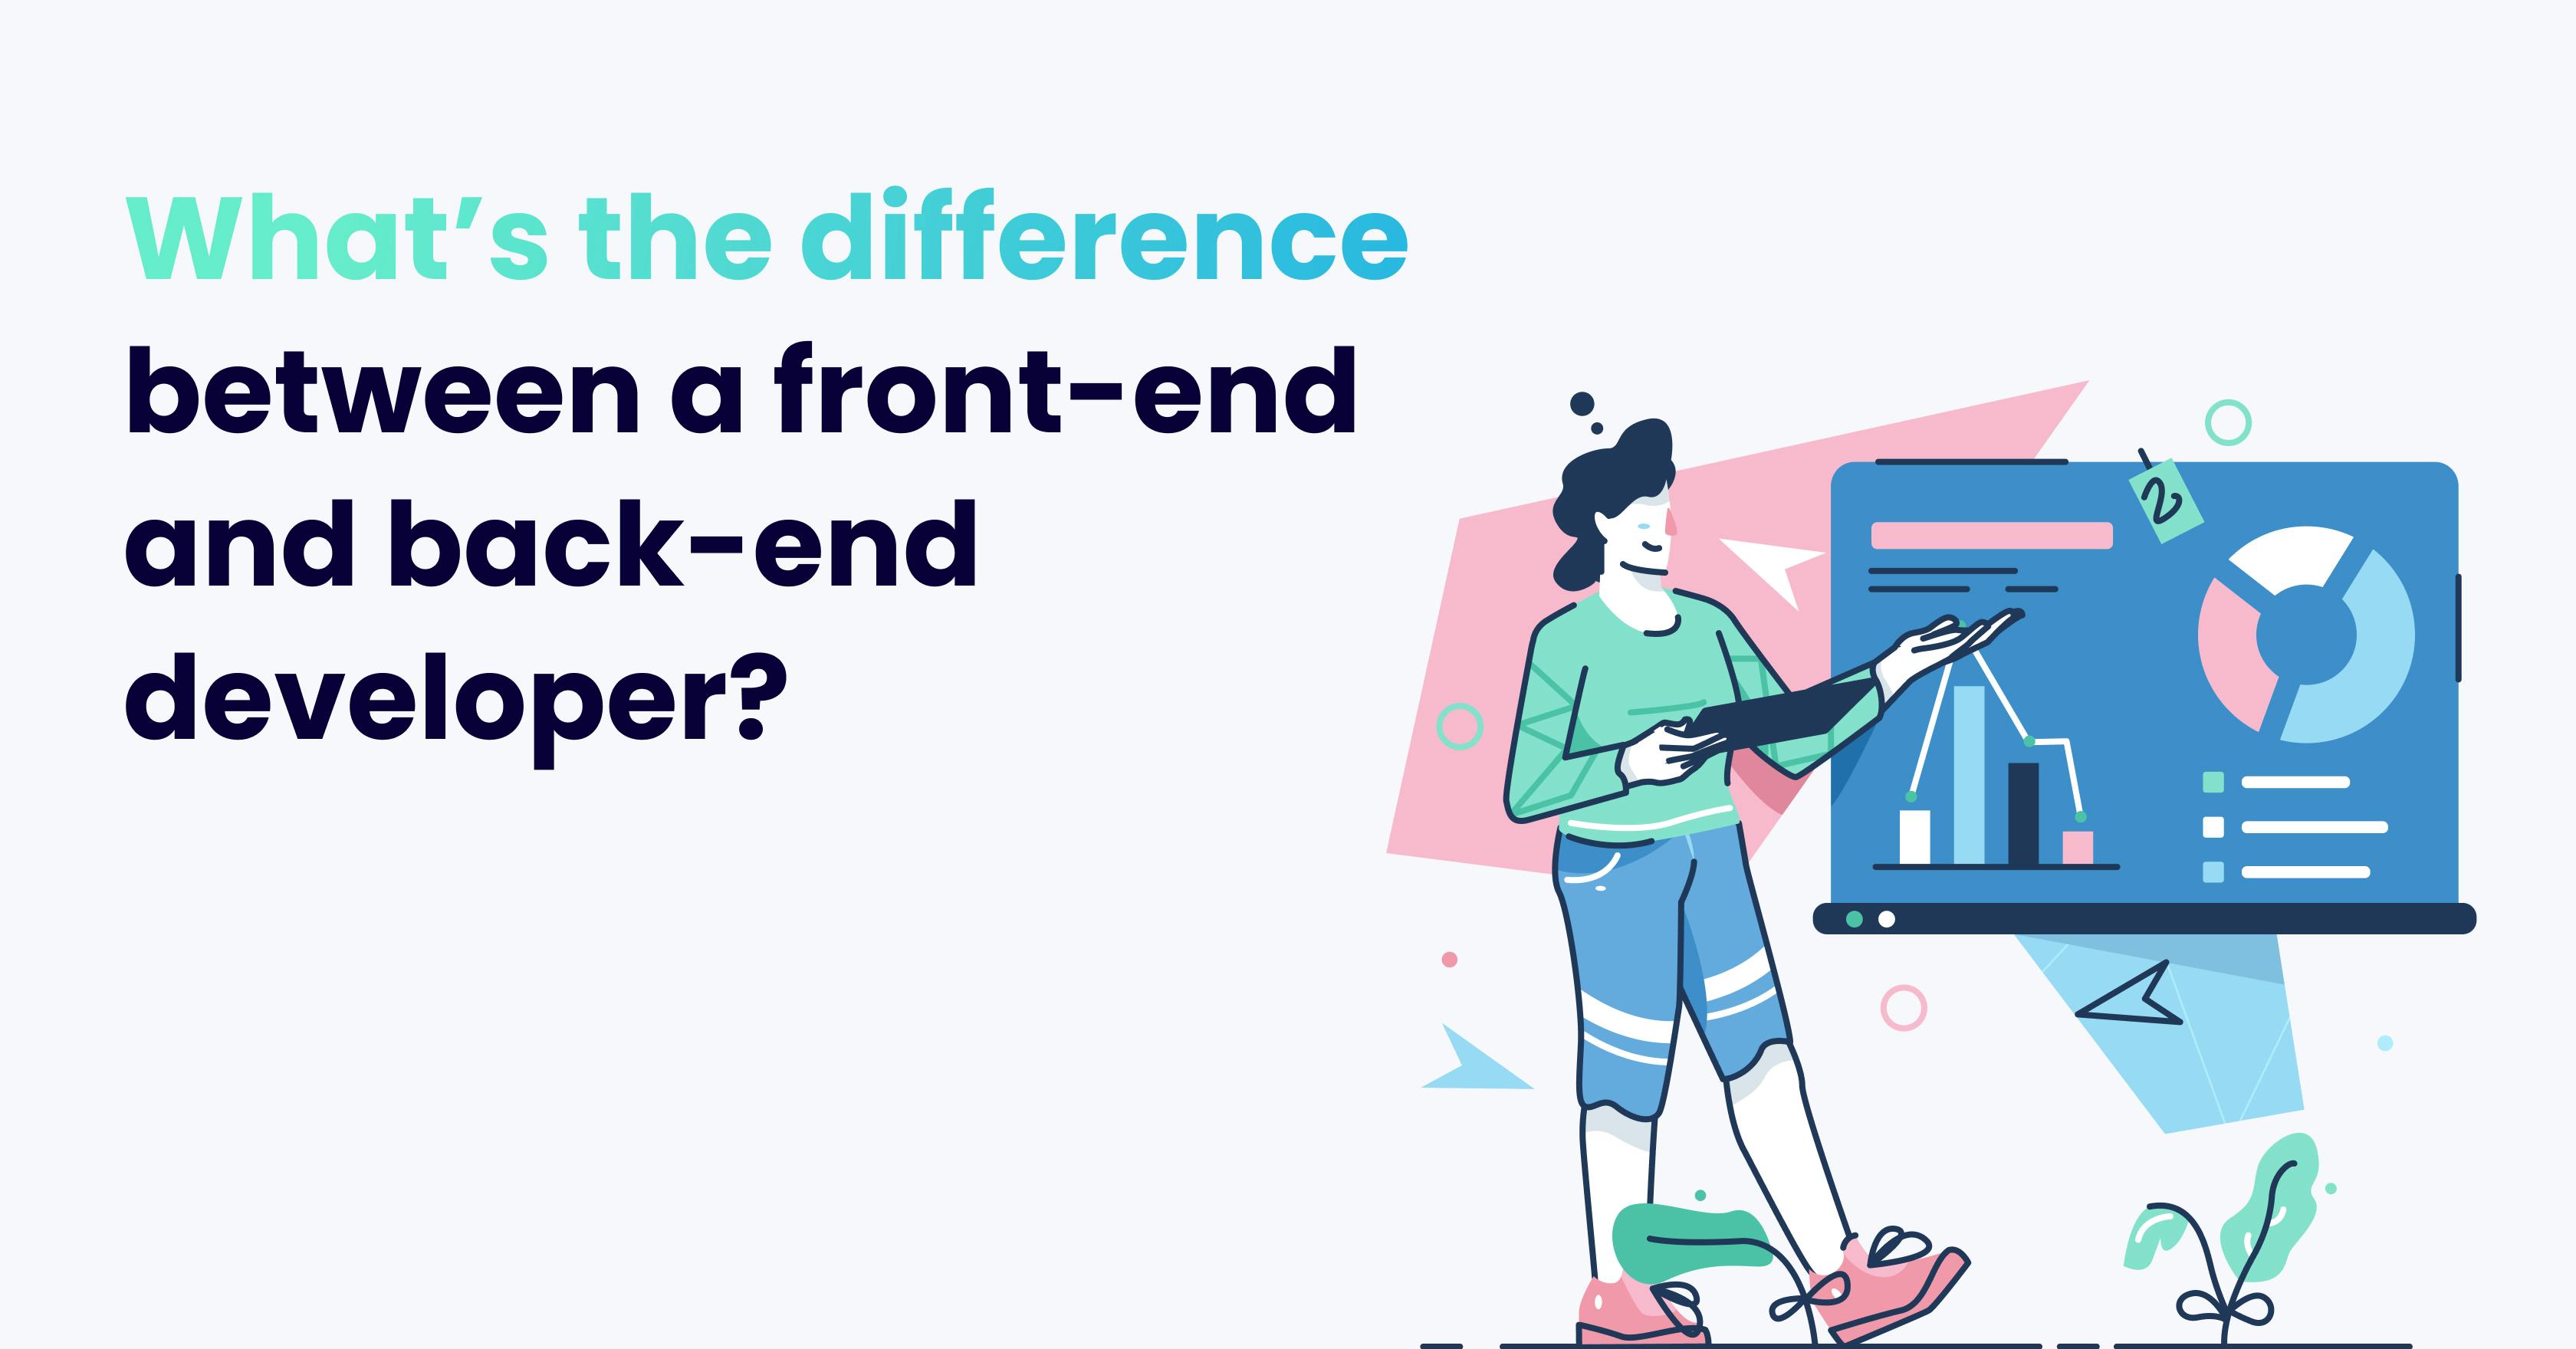 Nightborn - What's the difference between a front-end & back-end developer?